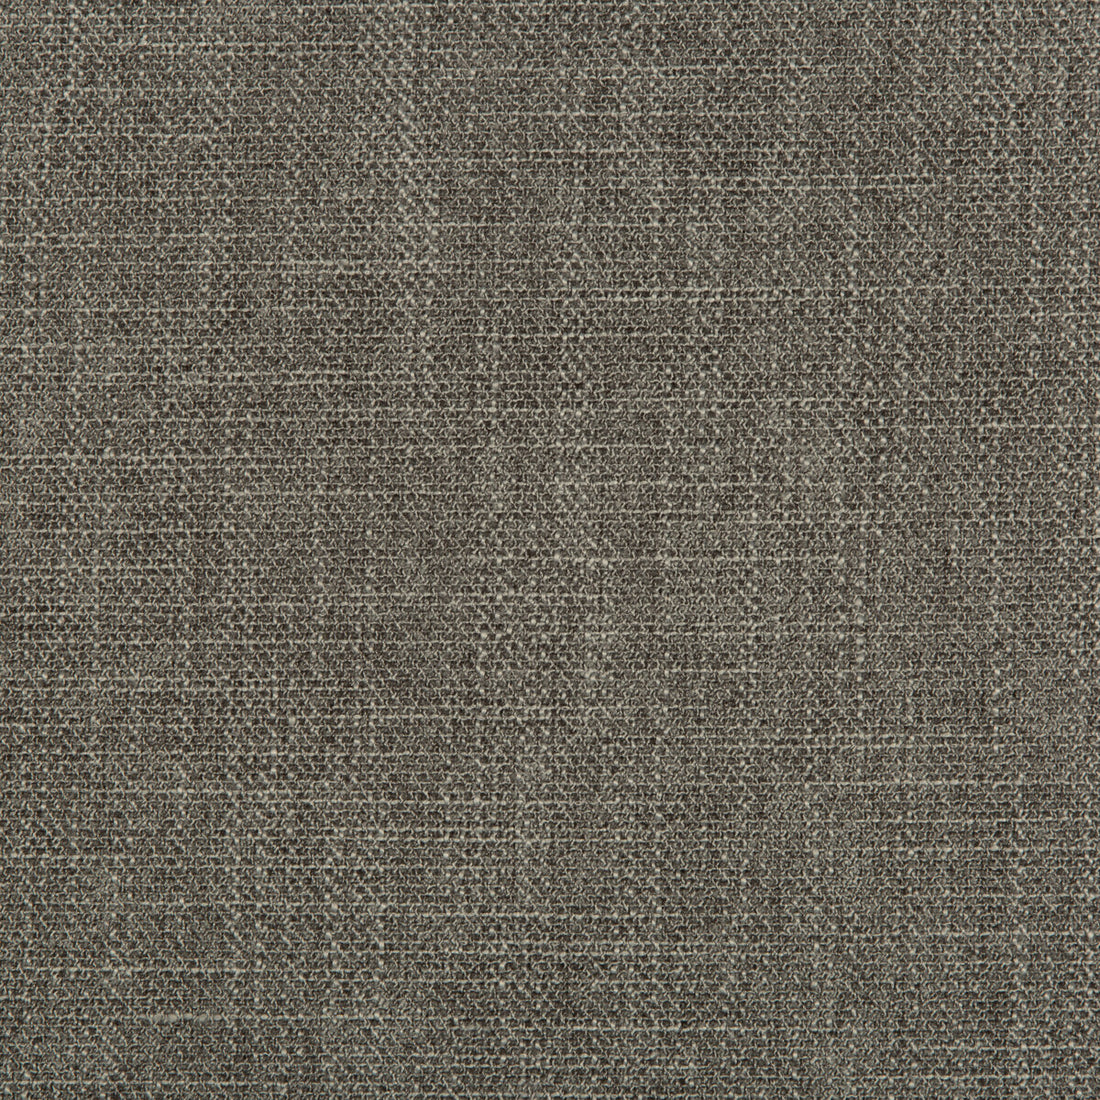 Kf Smt fabric - pattern 35390.21.0 - by Kravet Smart in the Performance Crypton Home collection